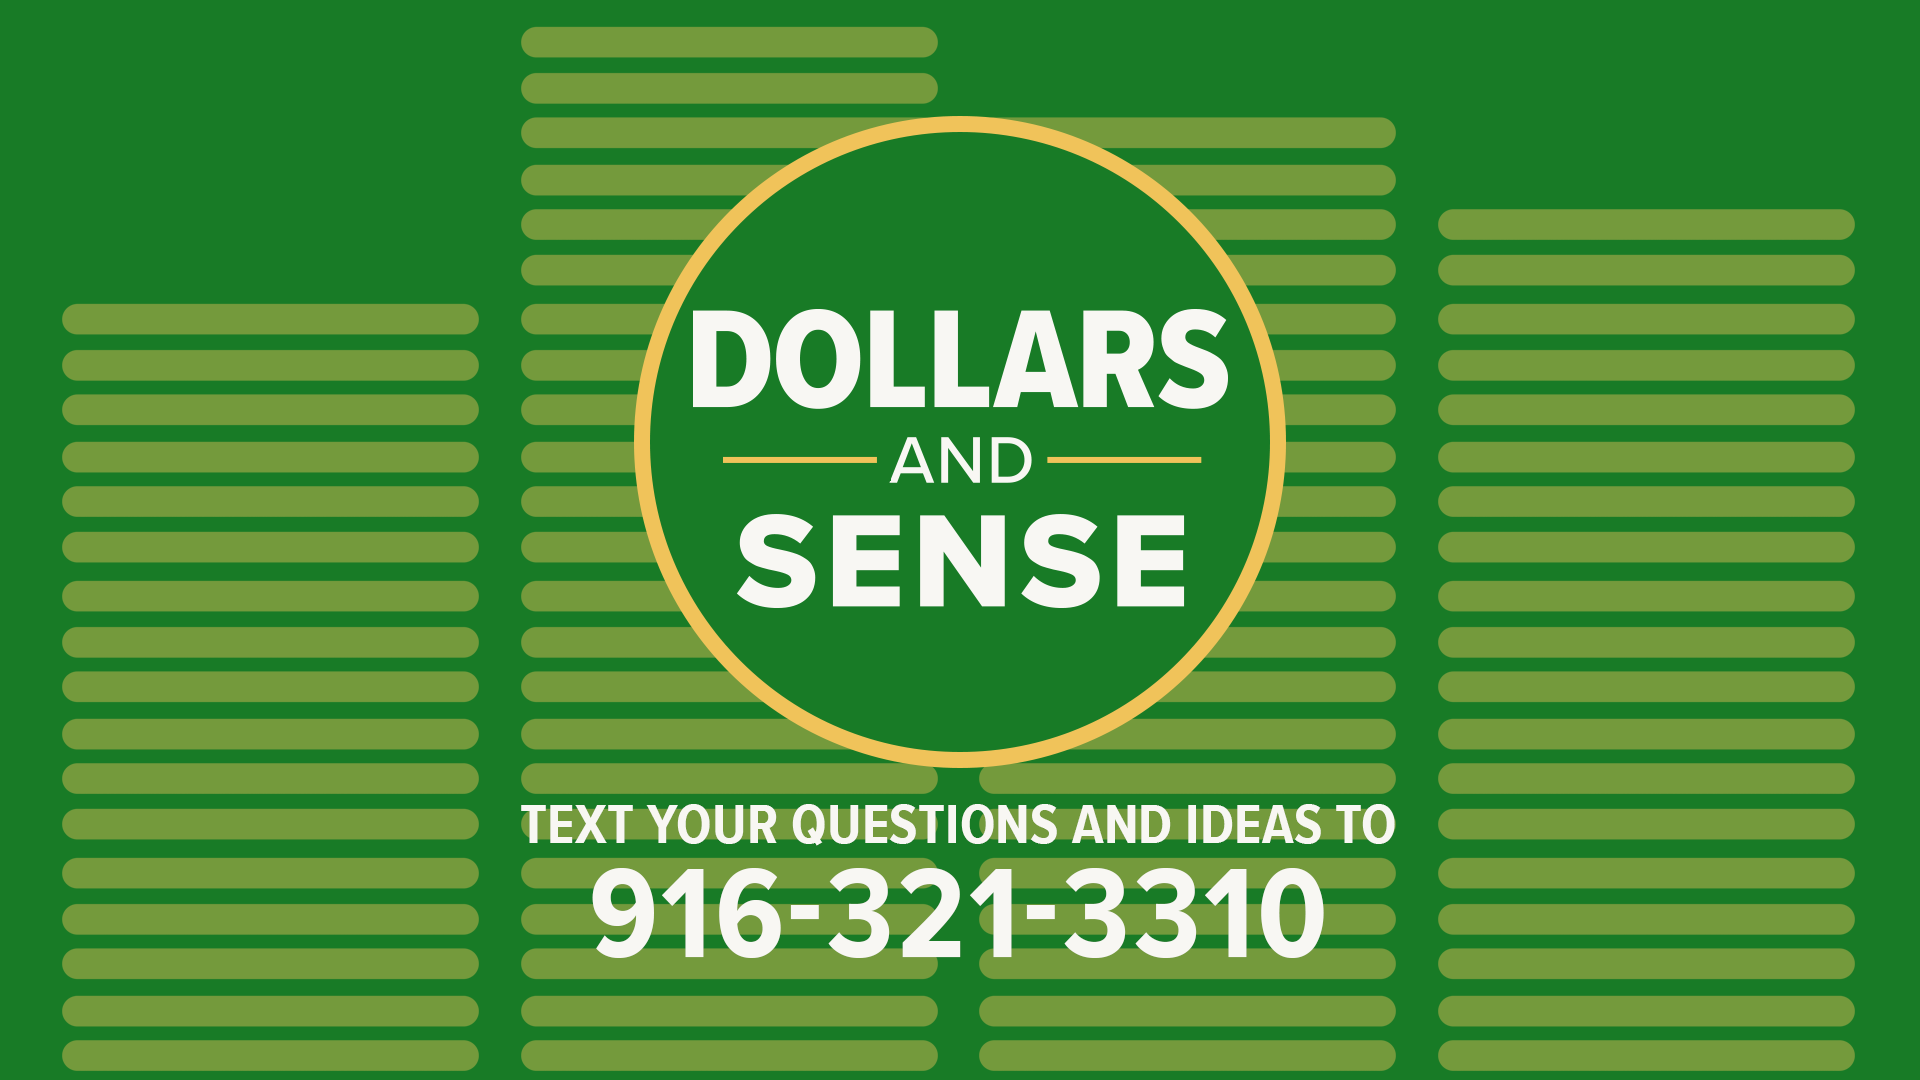 If you have a financial question or concern, text the 'Dollars and Sense' team at 916-321-3310.